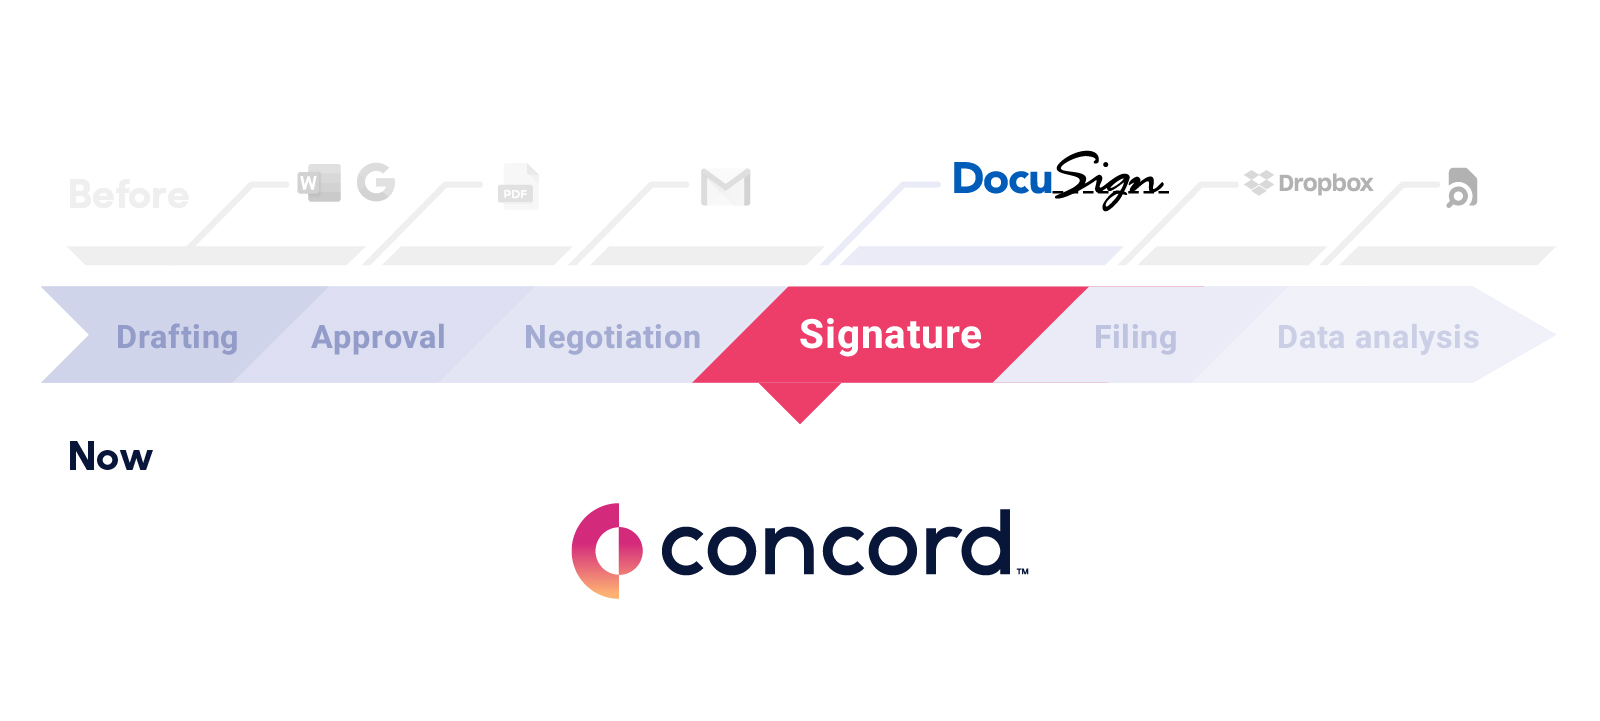 Electronic signatures are the final stage in finalizing the contract, but not the last stage of the contract lifecycle.